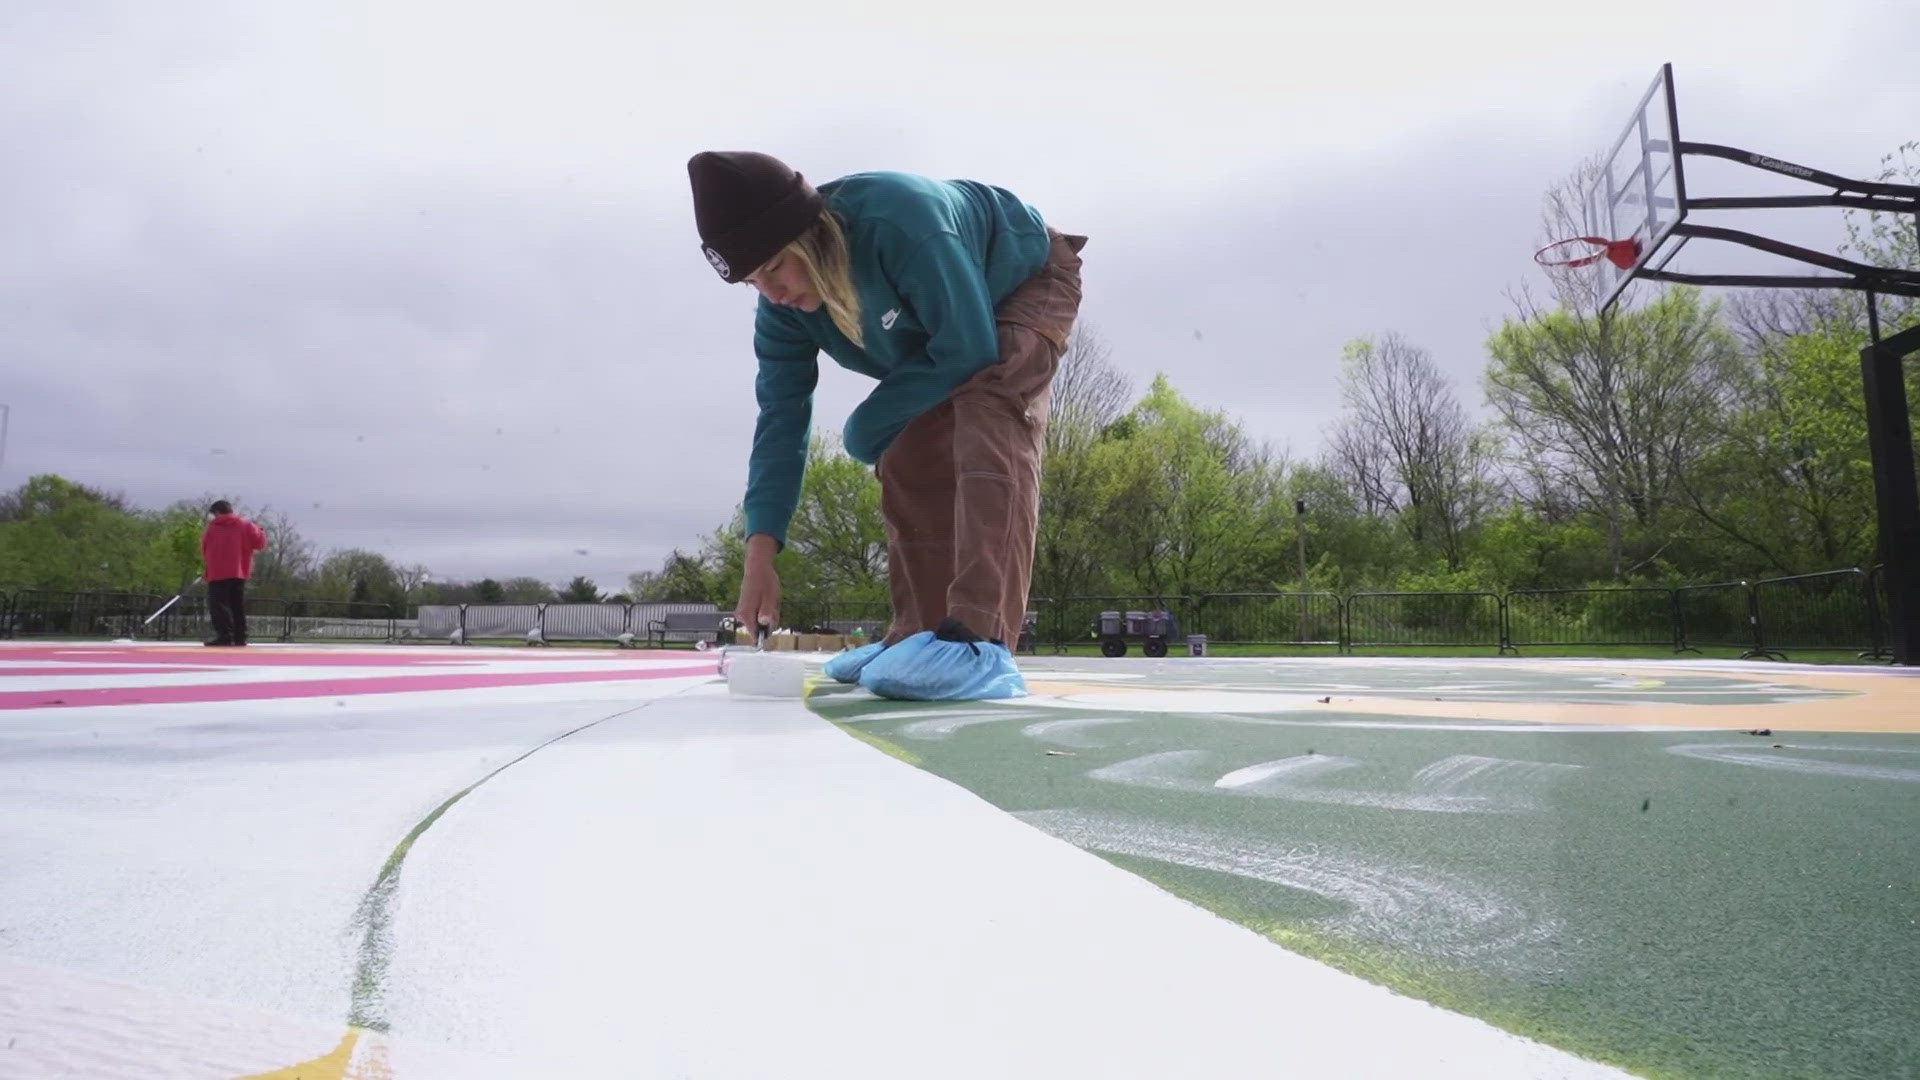 13News anchor Dustin Grove reports from Brooks School Park where local artists are painting basketball courts.